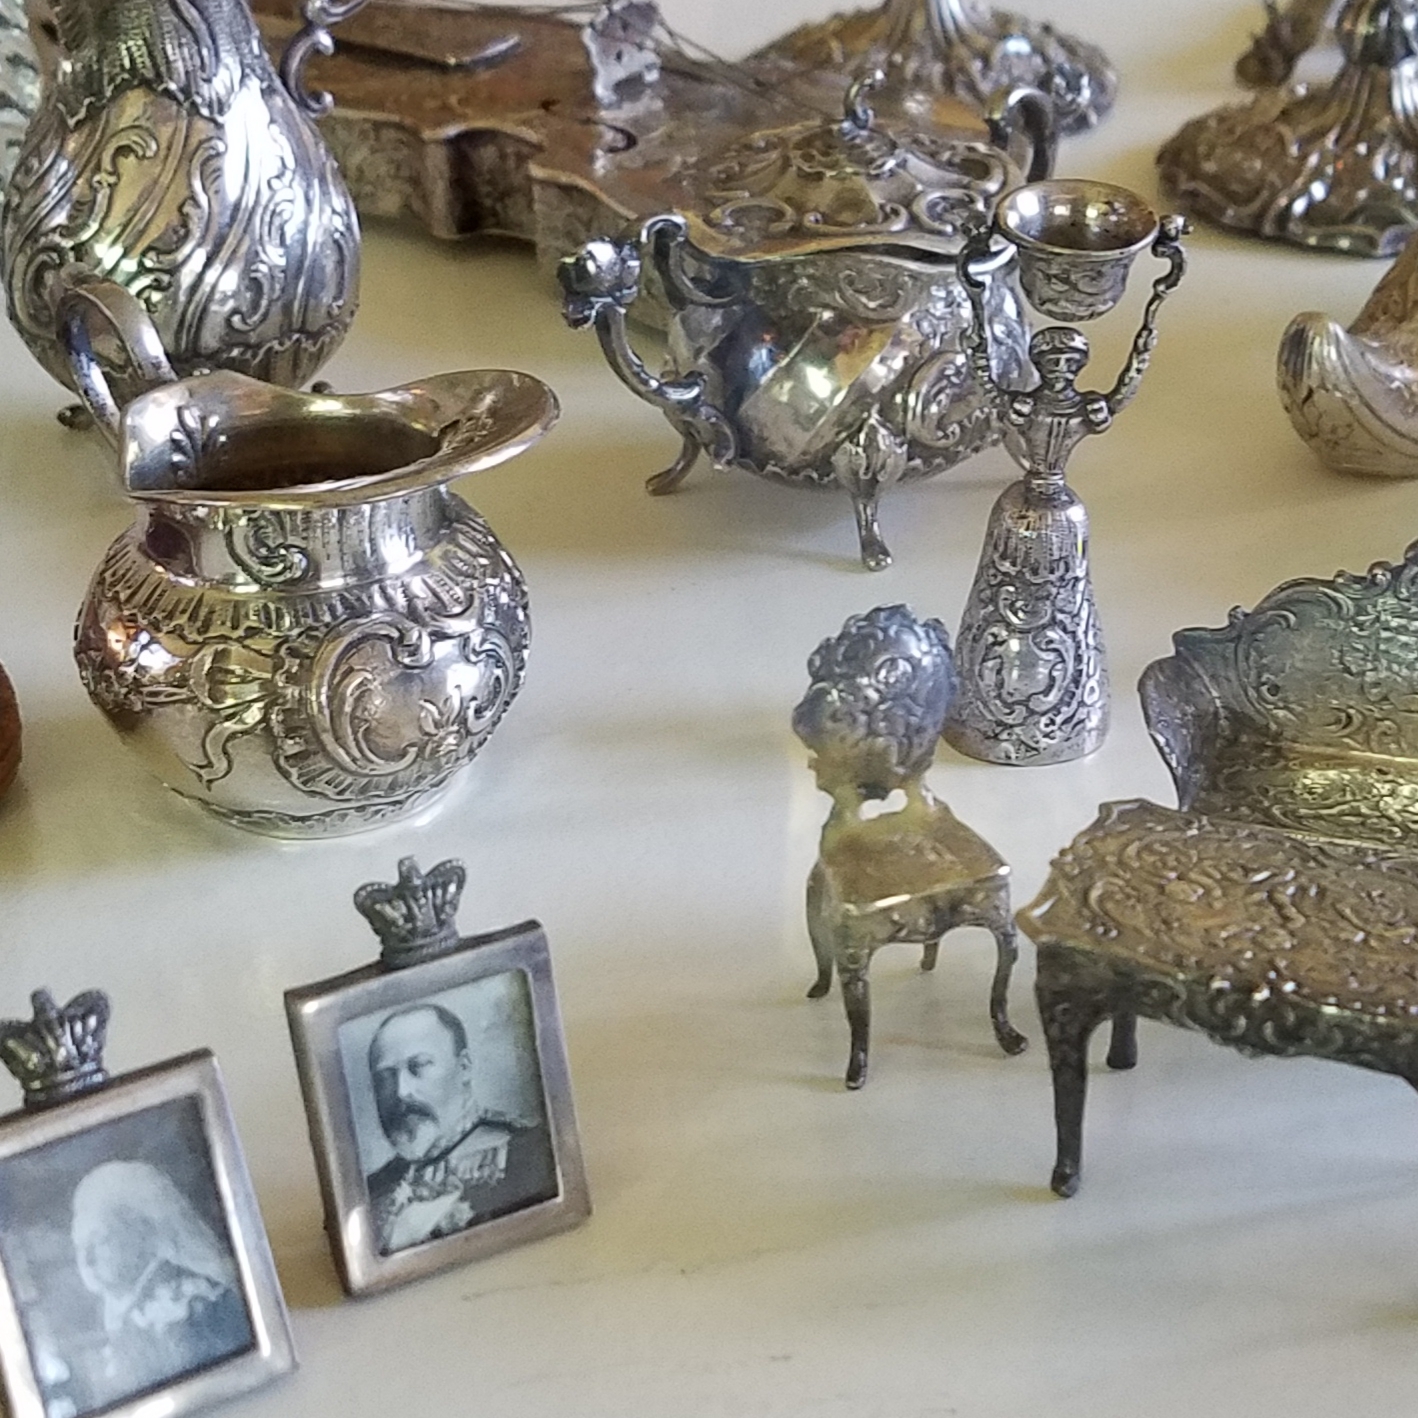 The Dutch custom of giving silver miniatures became popular in Victorian times. 